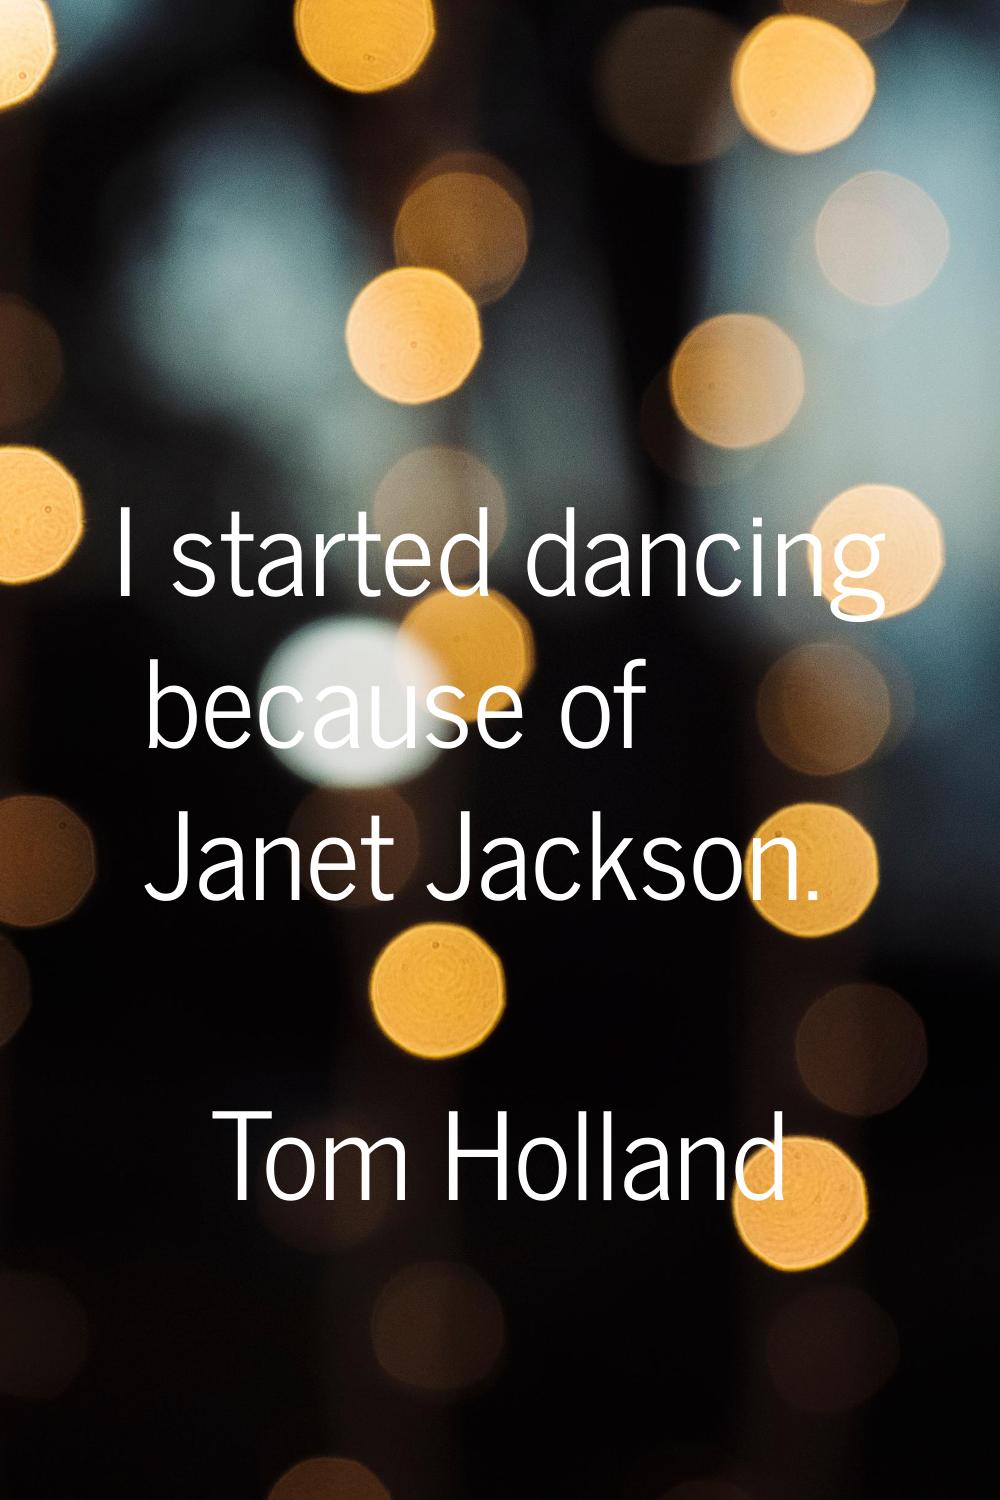 I started dancing because of Janet Jackson.